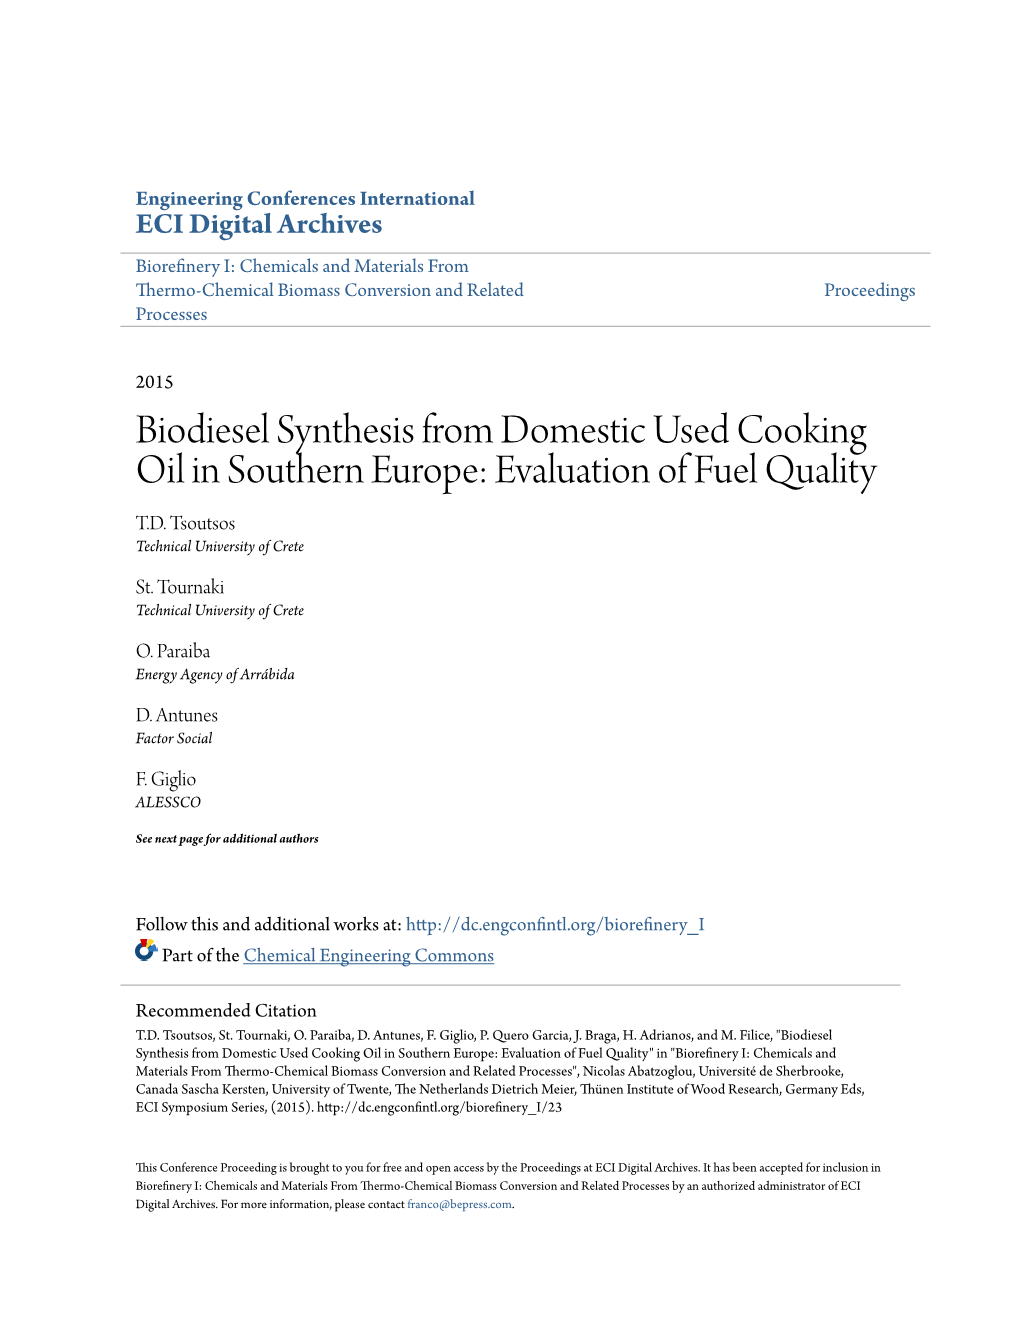 Biodiesel Synthesis from Domestic Used Cooking Oil in Southern Europe: Evaluation of Fuel Quality T.D